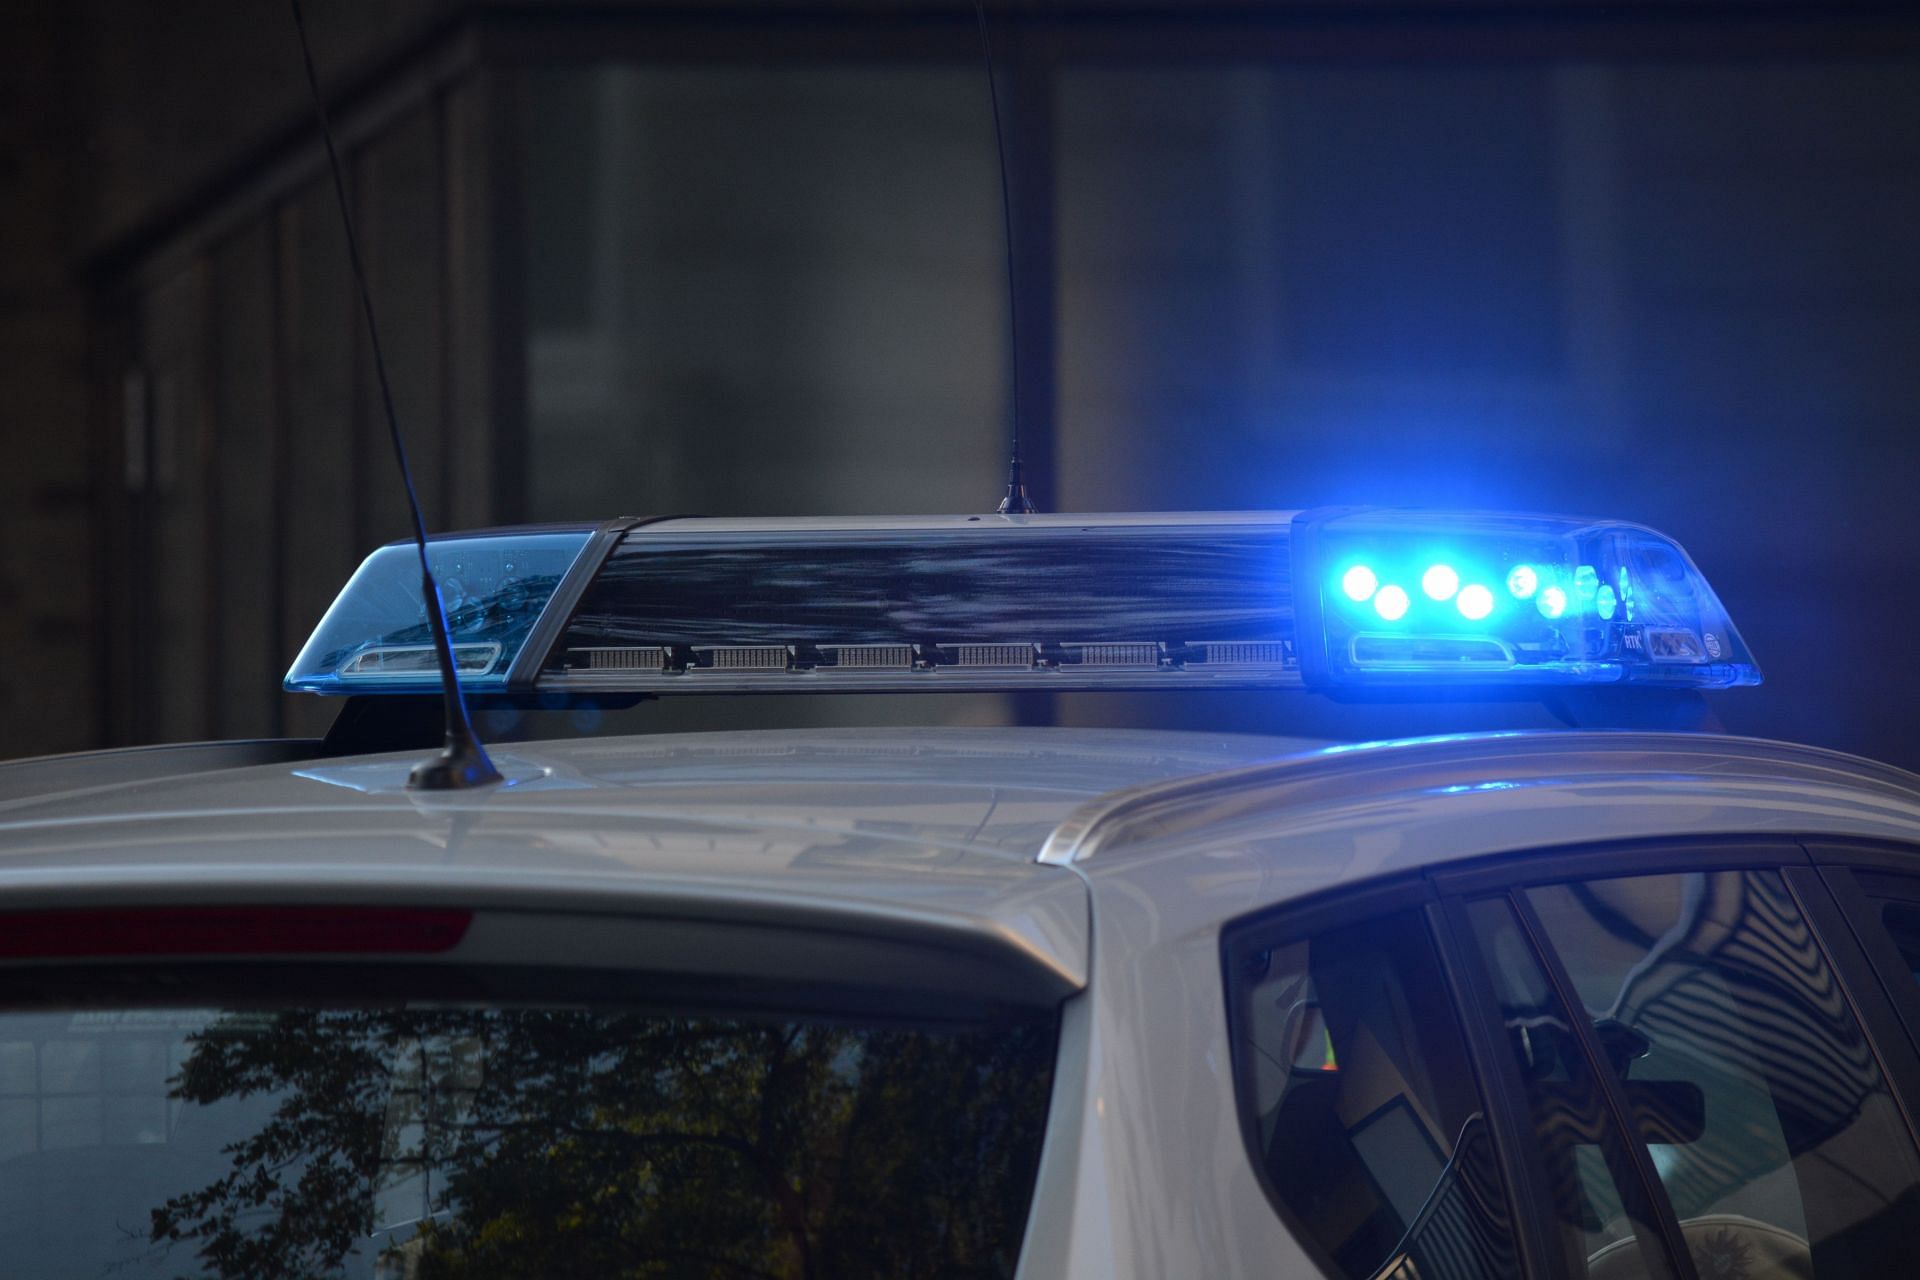 Led to further police investigation due to lack of awareness (Image via Pexels / Pixabay)